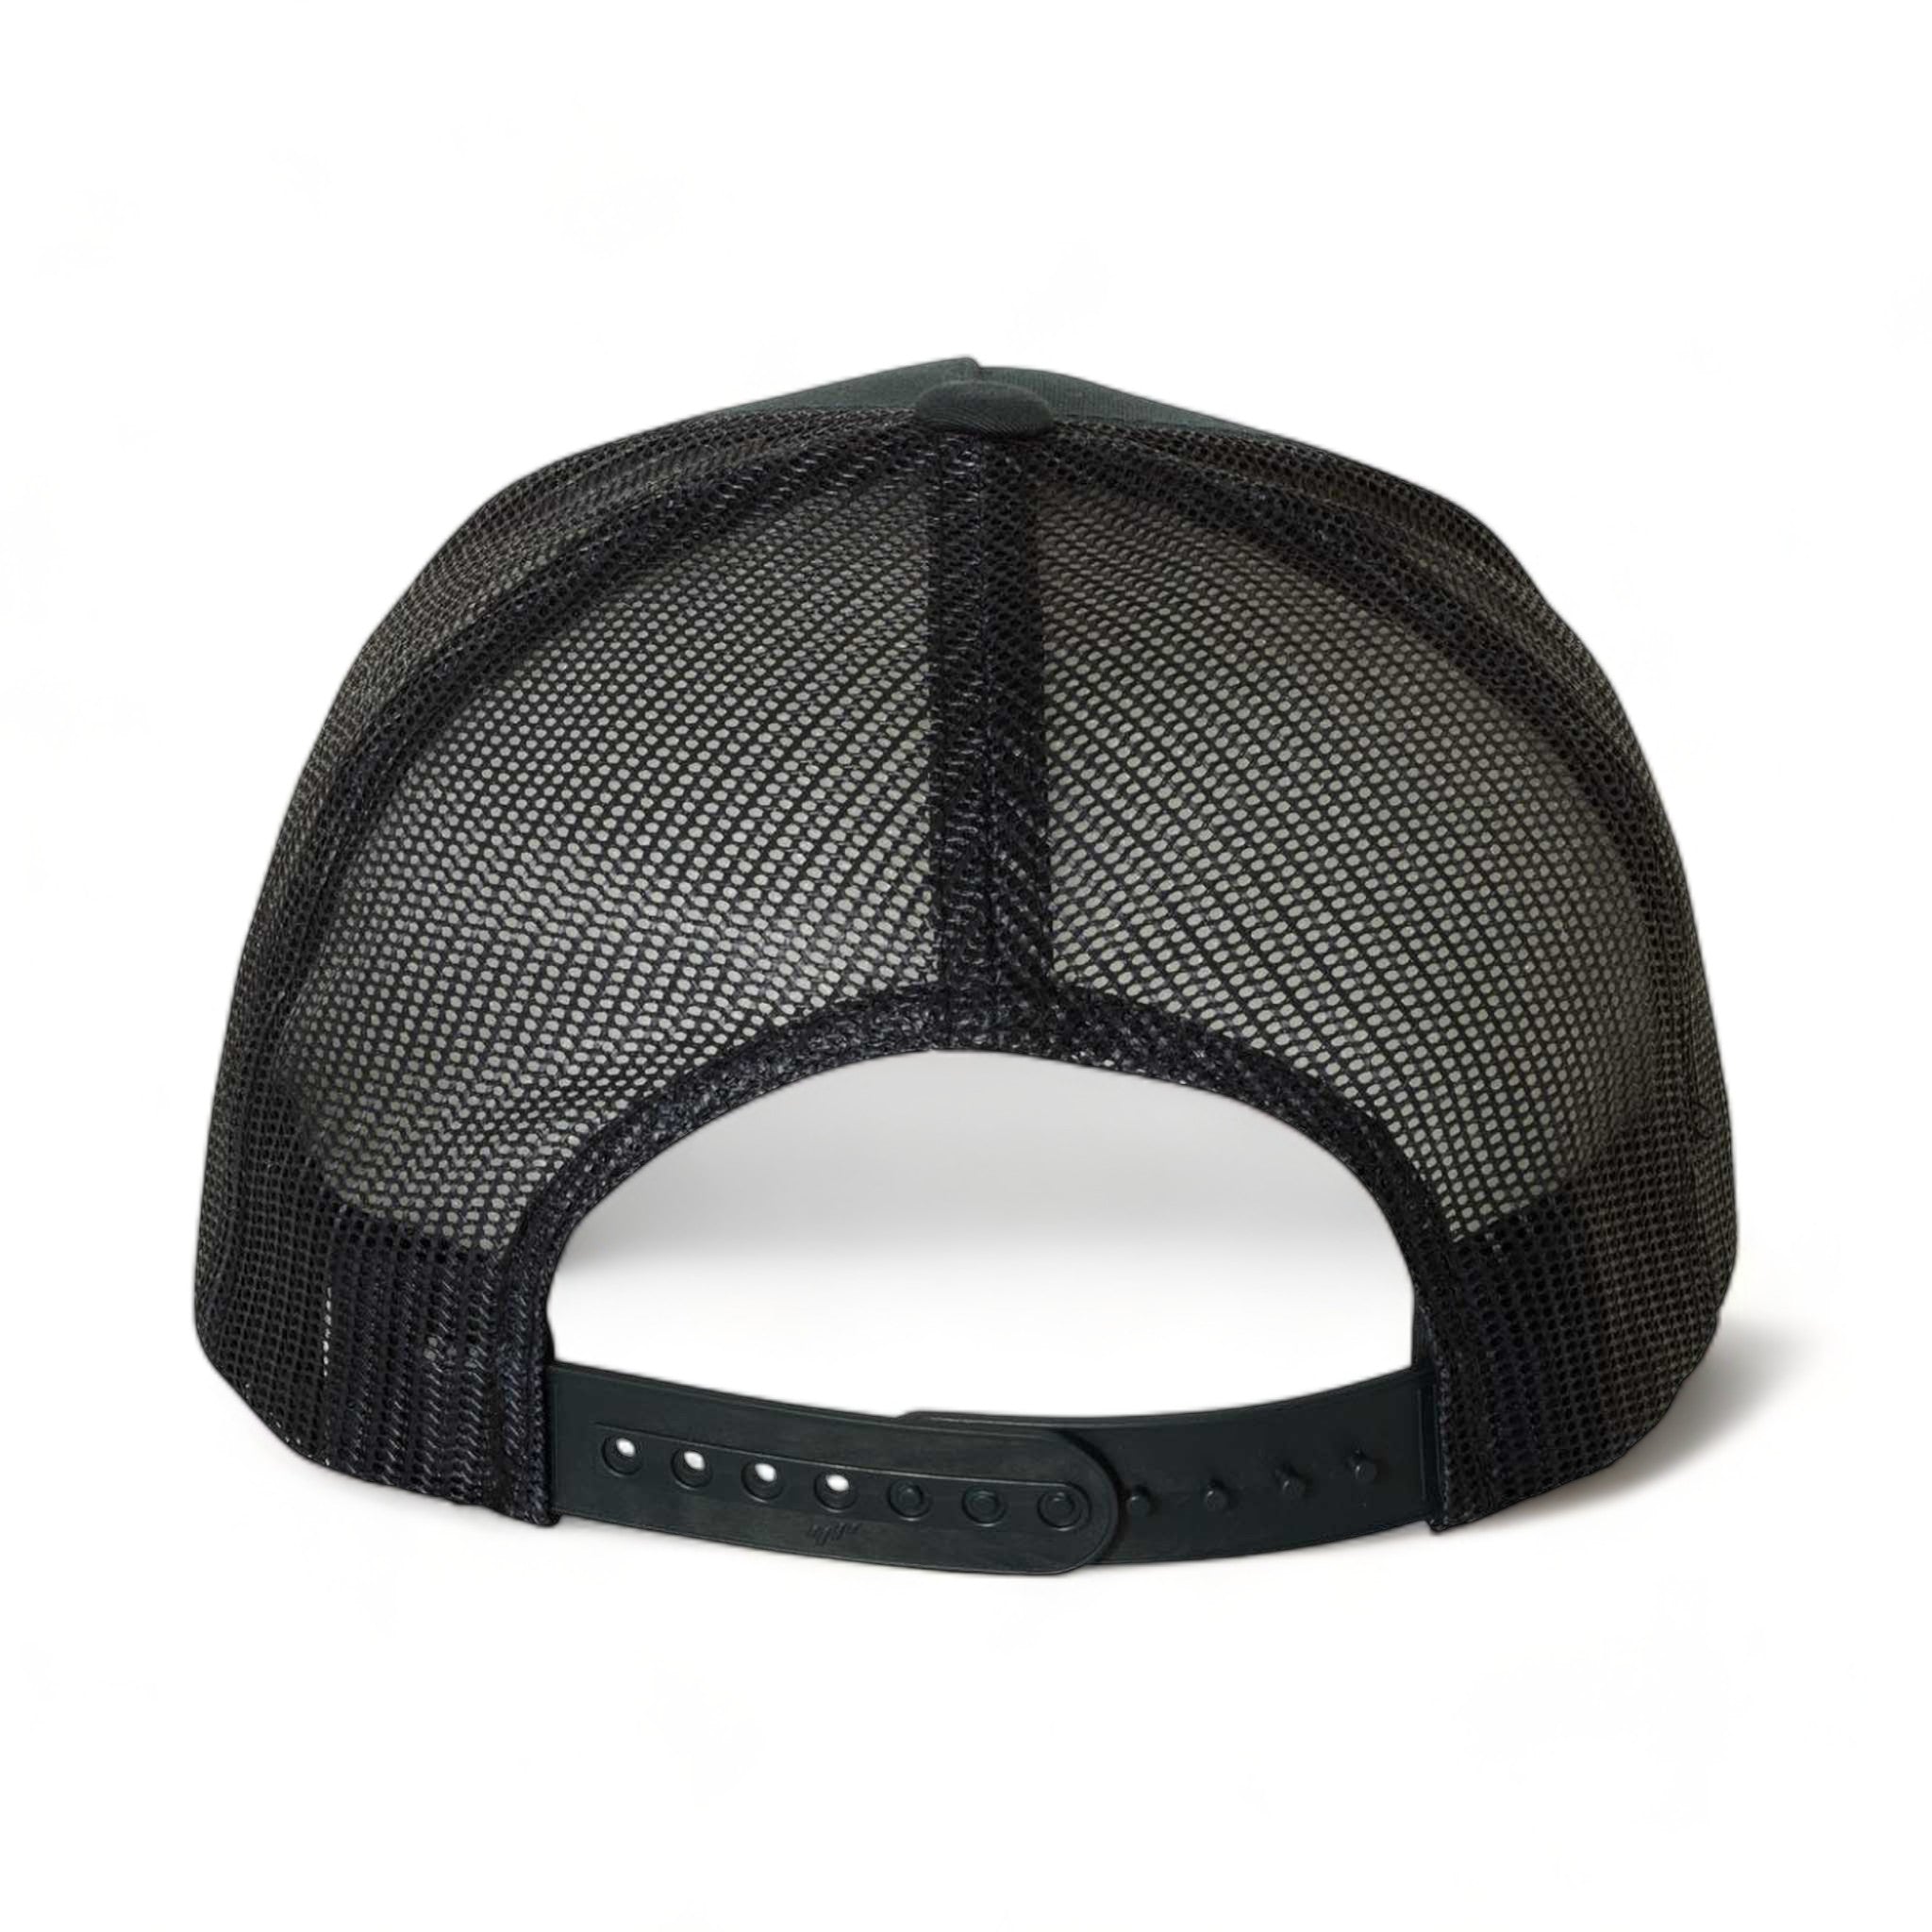 Back view of YP Classics 6506 custom hat in black